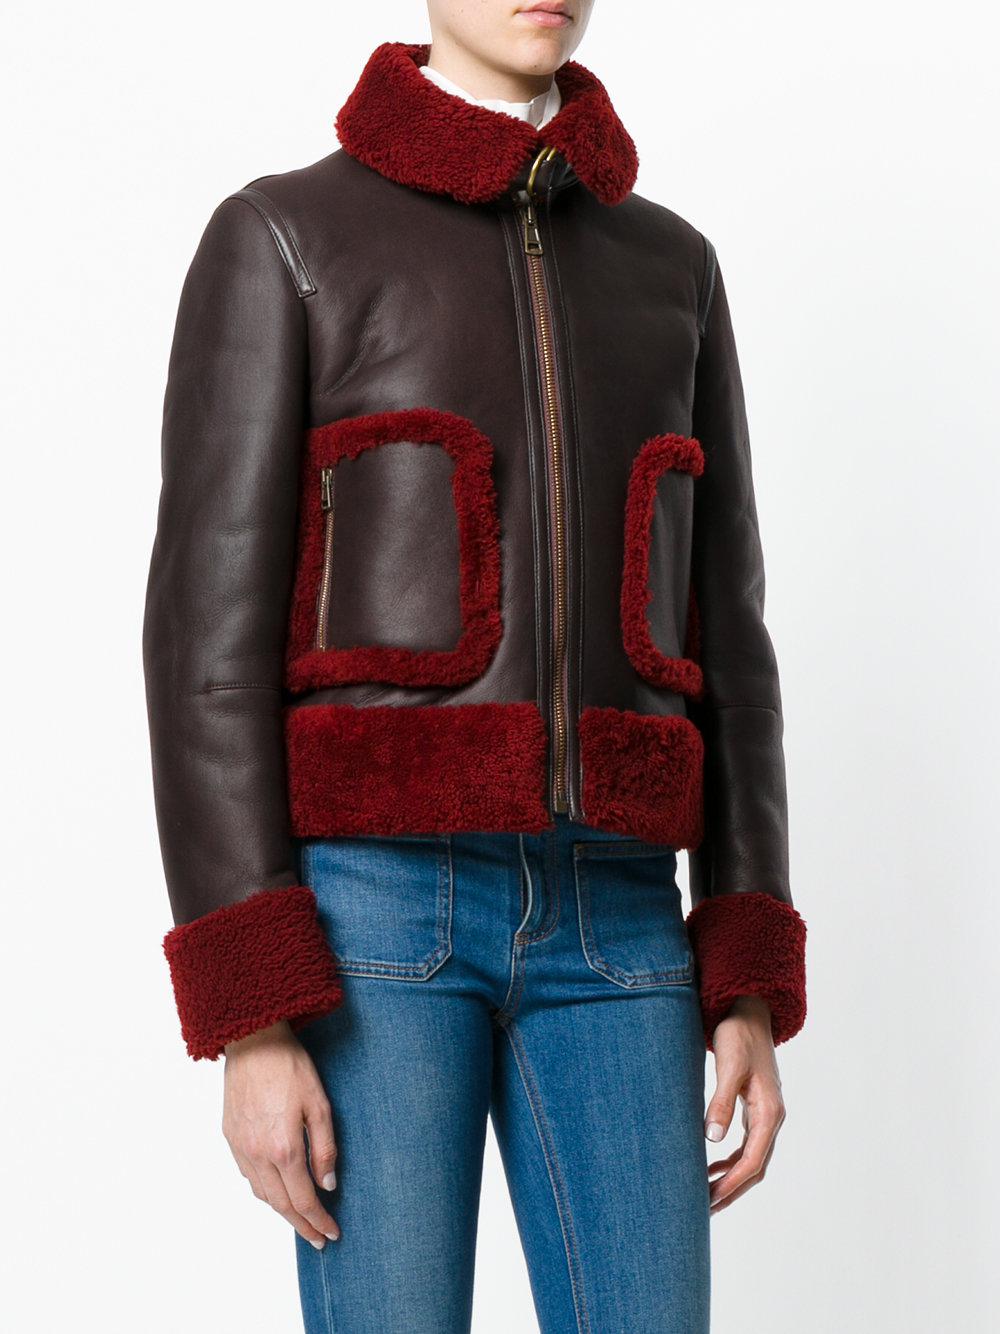 Lyst - Chloé Shearling Trim Leather Jacket in Brown